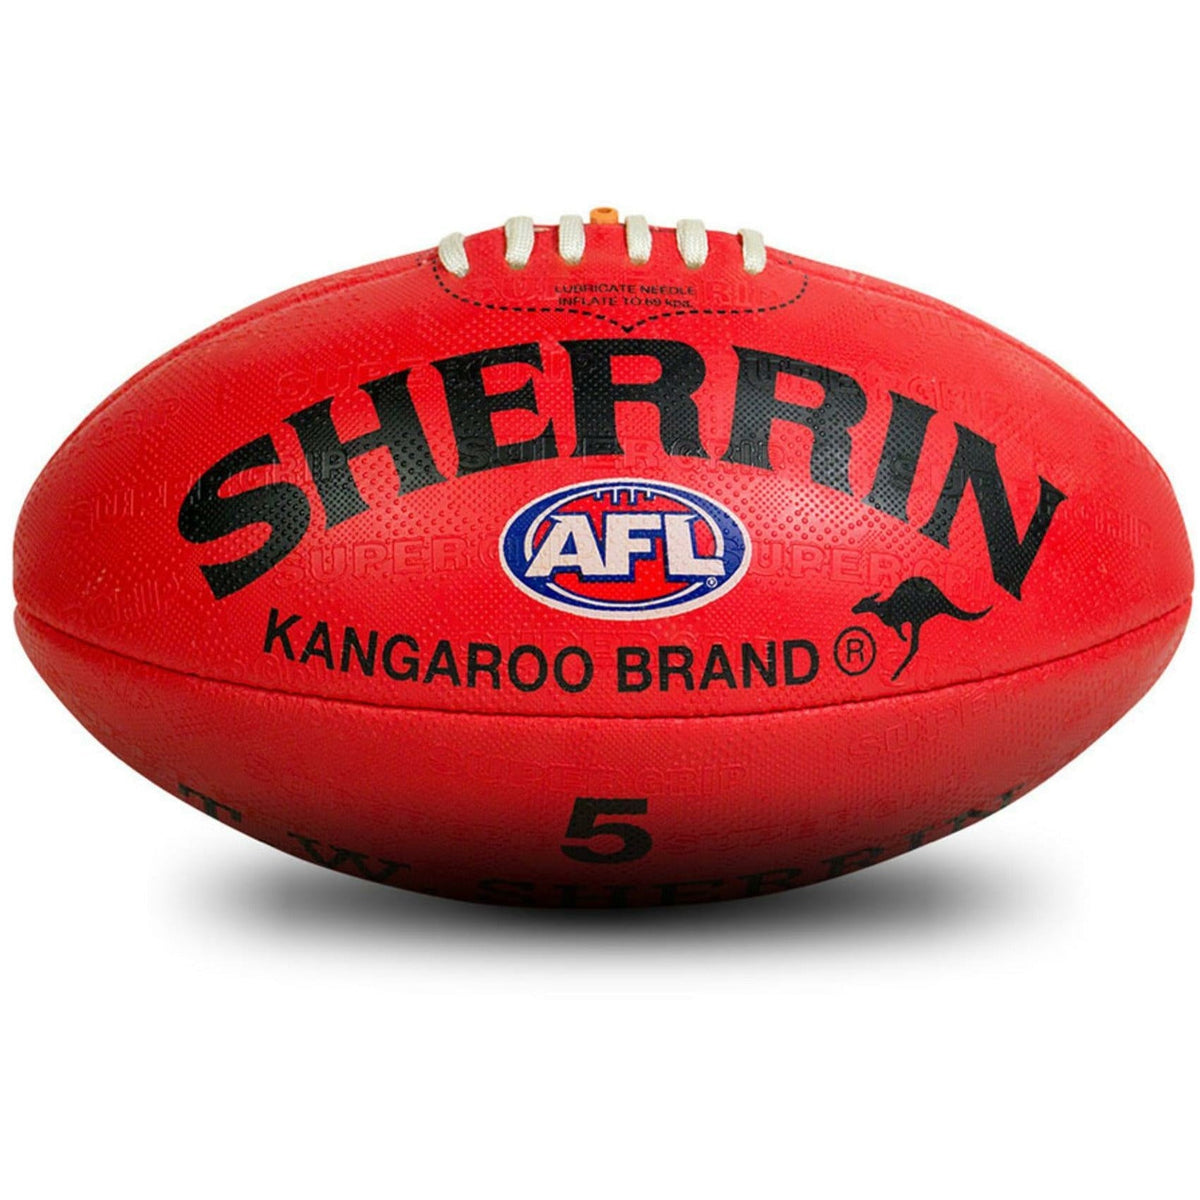 Sherrin KB Synthetic AFL Ball - Size 5 